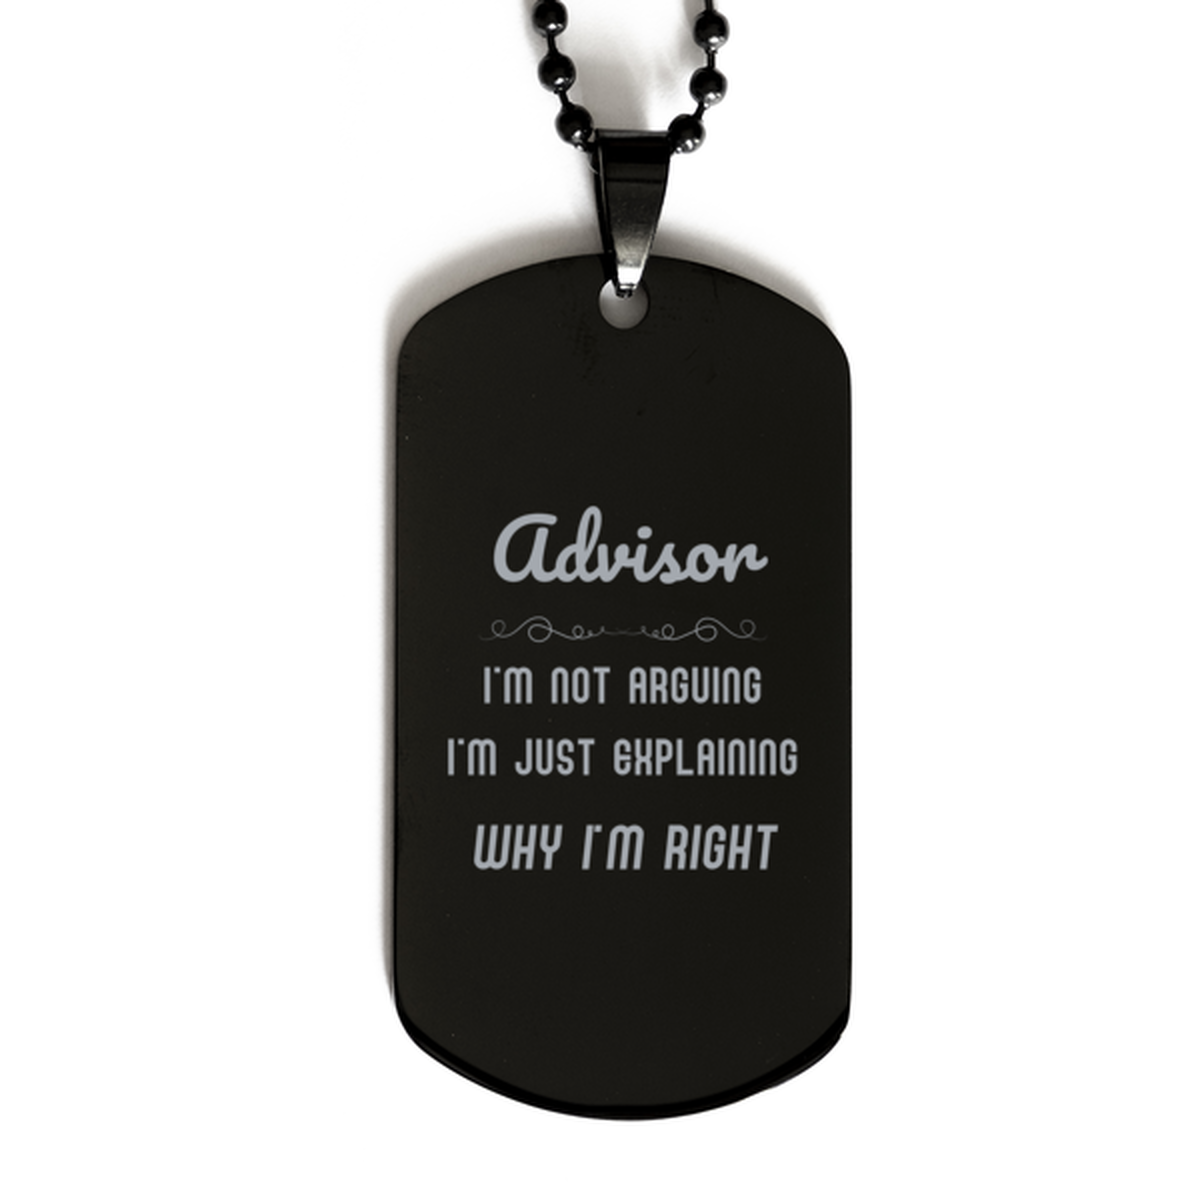 Advisor I'm not Arguing. I'm Just Explaining Why I'm RIGHT Black Dog Tag, Funny Saying Quote Advisor Gifts For Advisor Graduation Birthday Christmas Gifts for Men Women Coworker